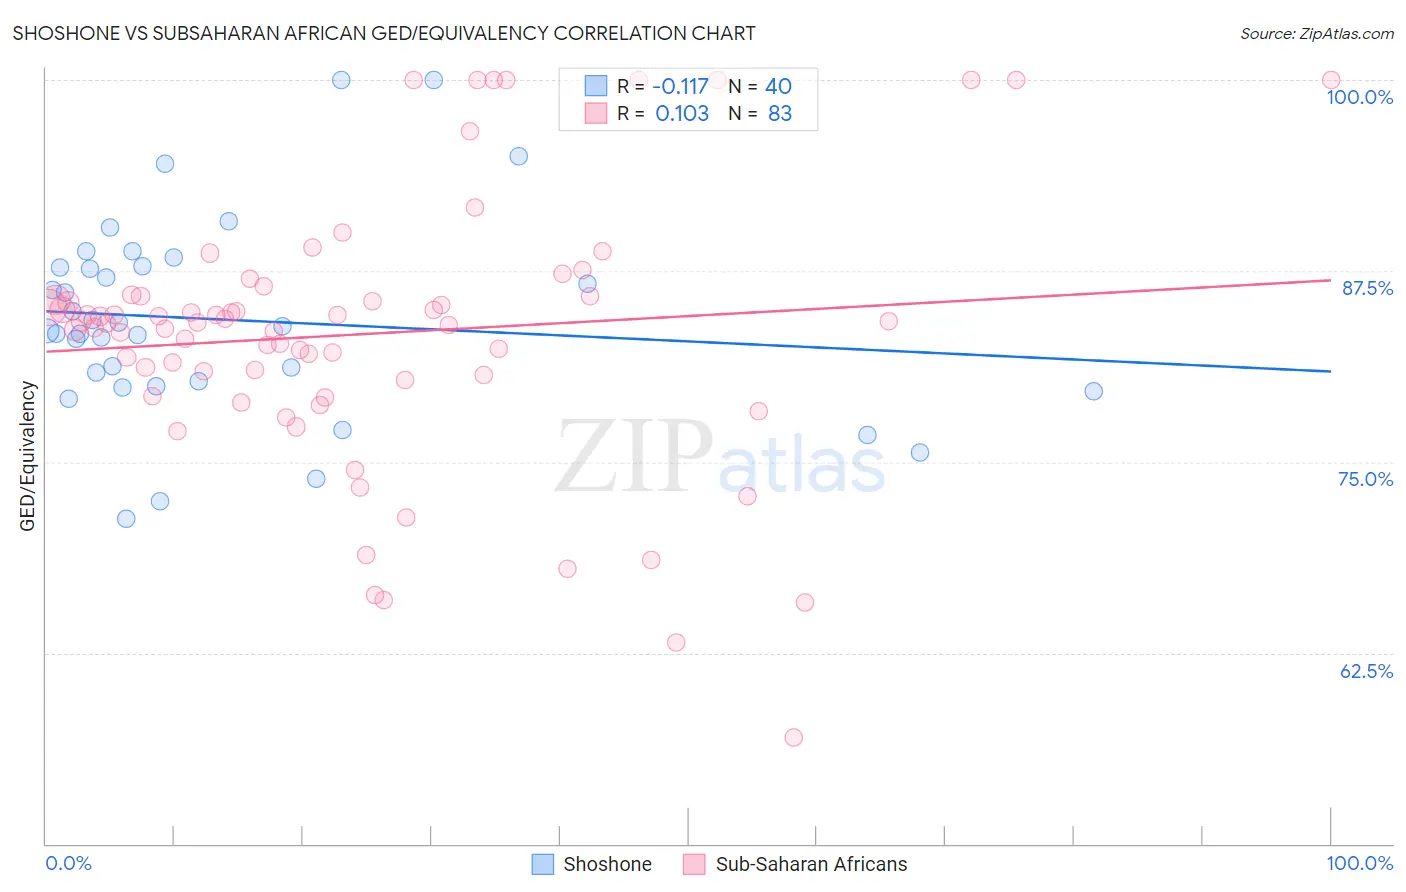 Shoshone vs Subsaharan African GED/Equivalency